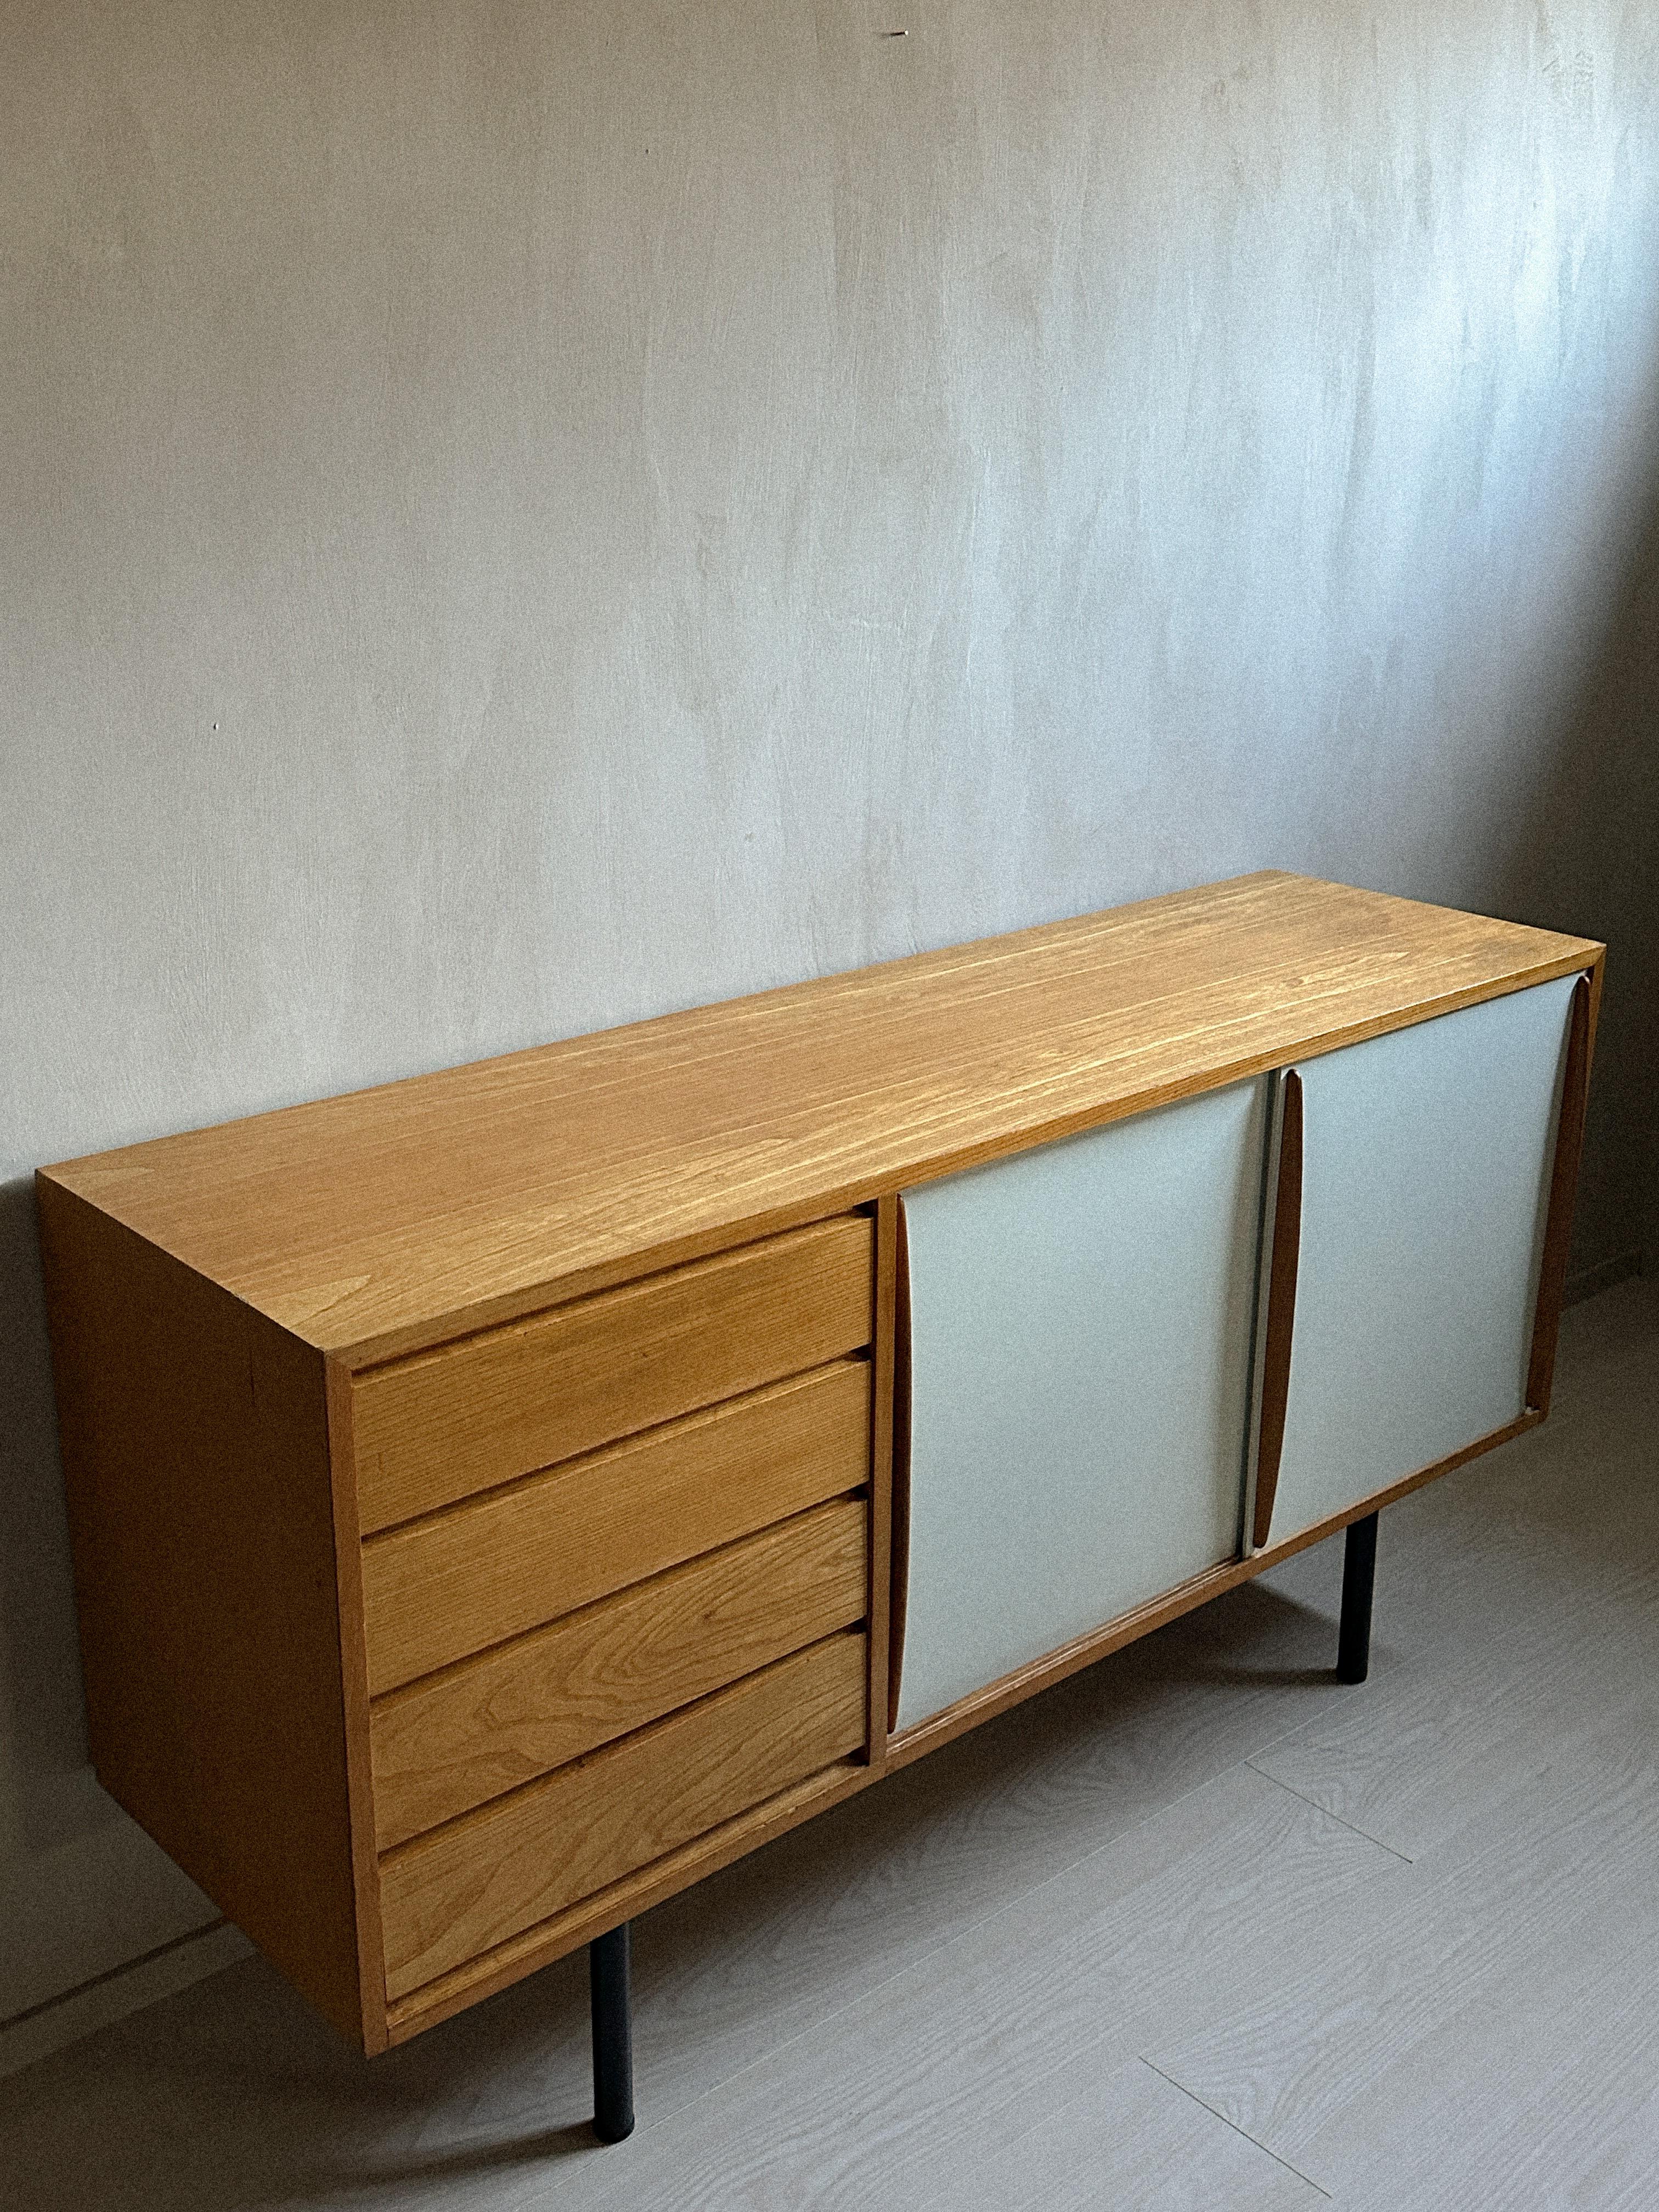 Finnish A Mid-Century Sideboard by Olli Borg, '4004' for Asko, Finland c. 1950s